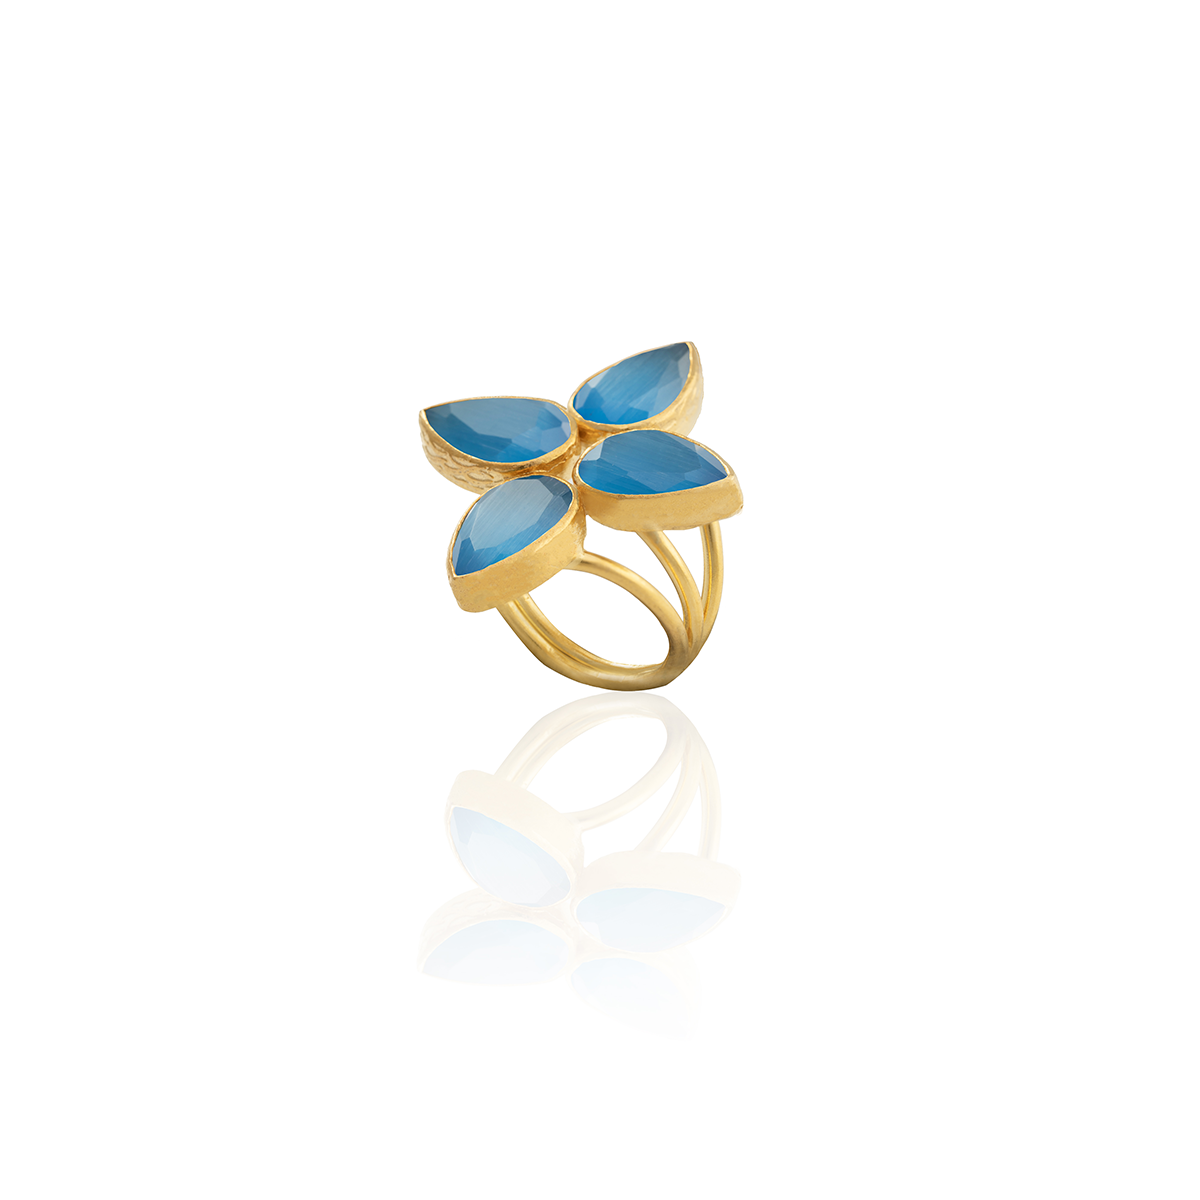 R31 Gold Plated Women's Ring - 100% Handcrafted Special Design